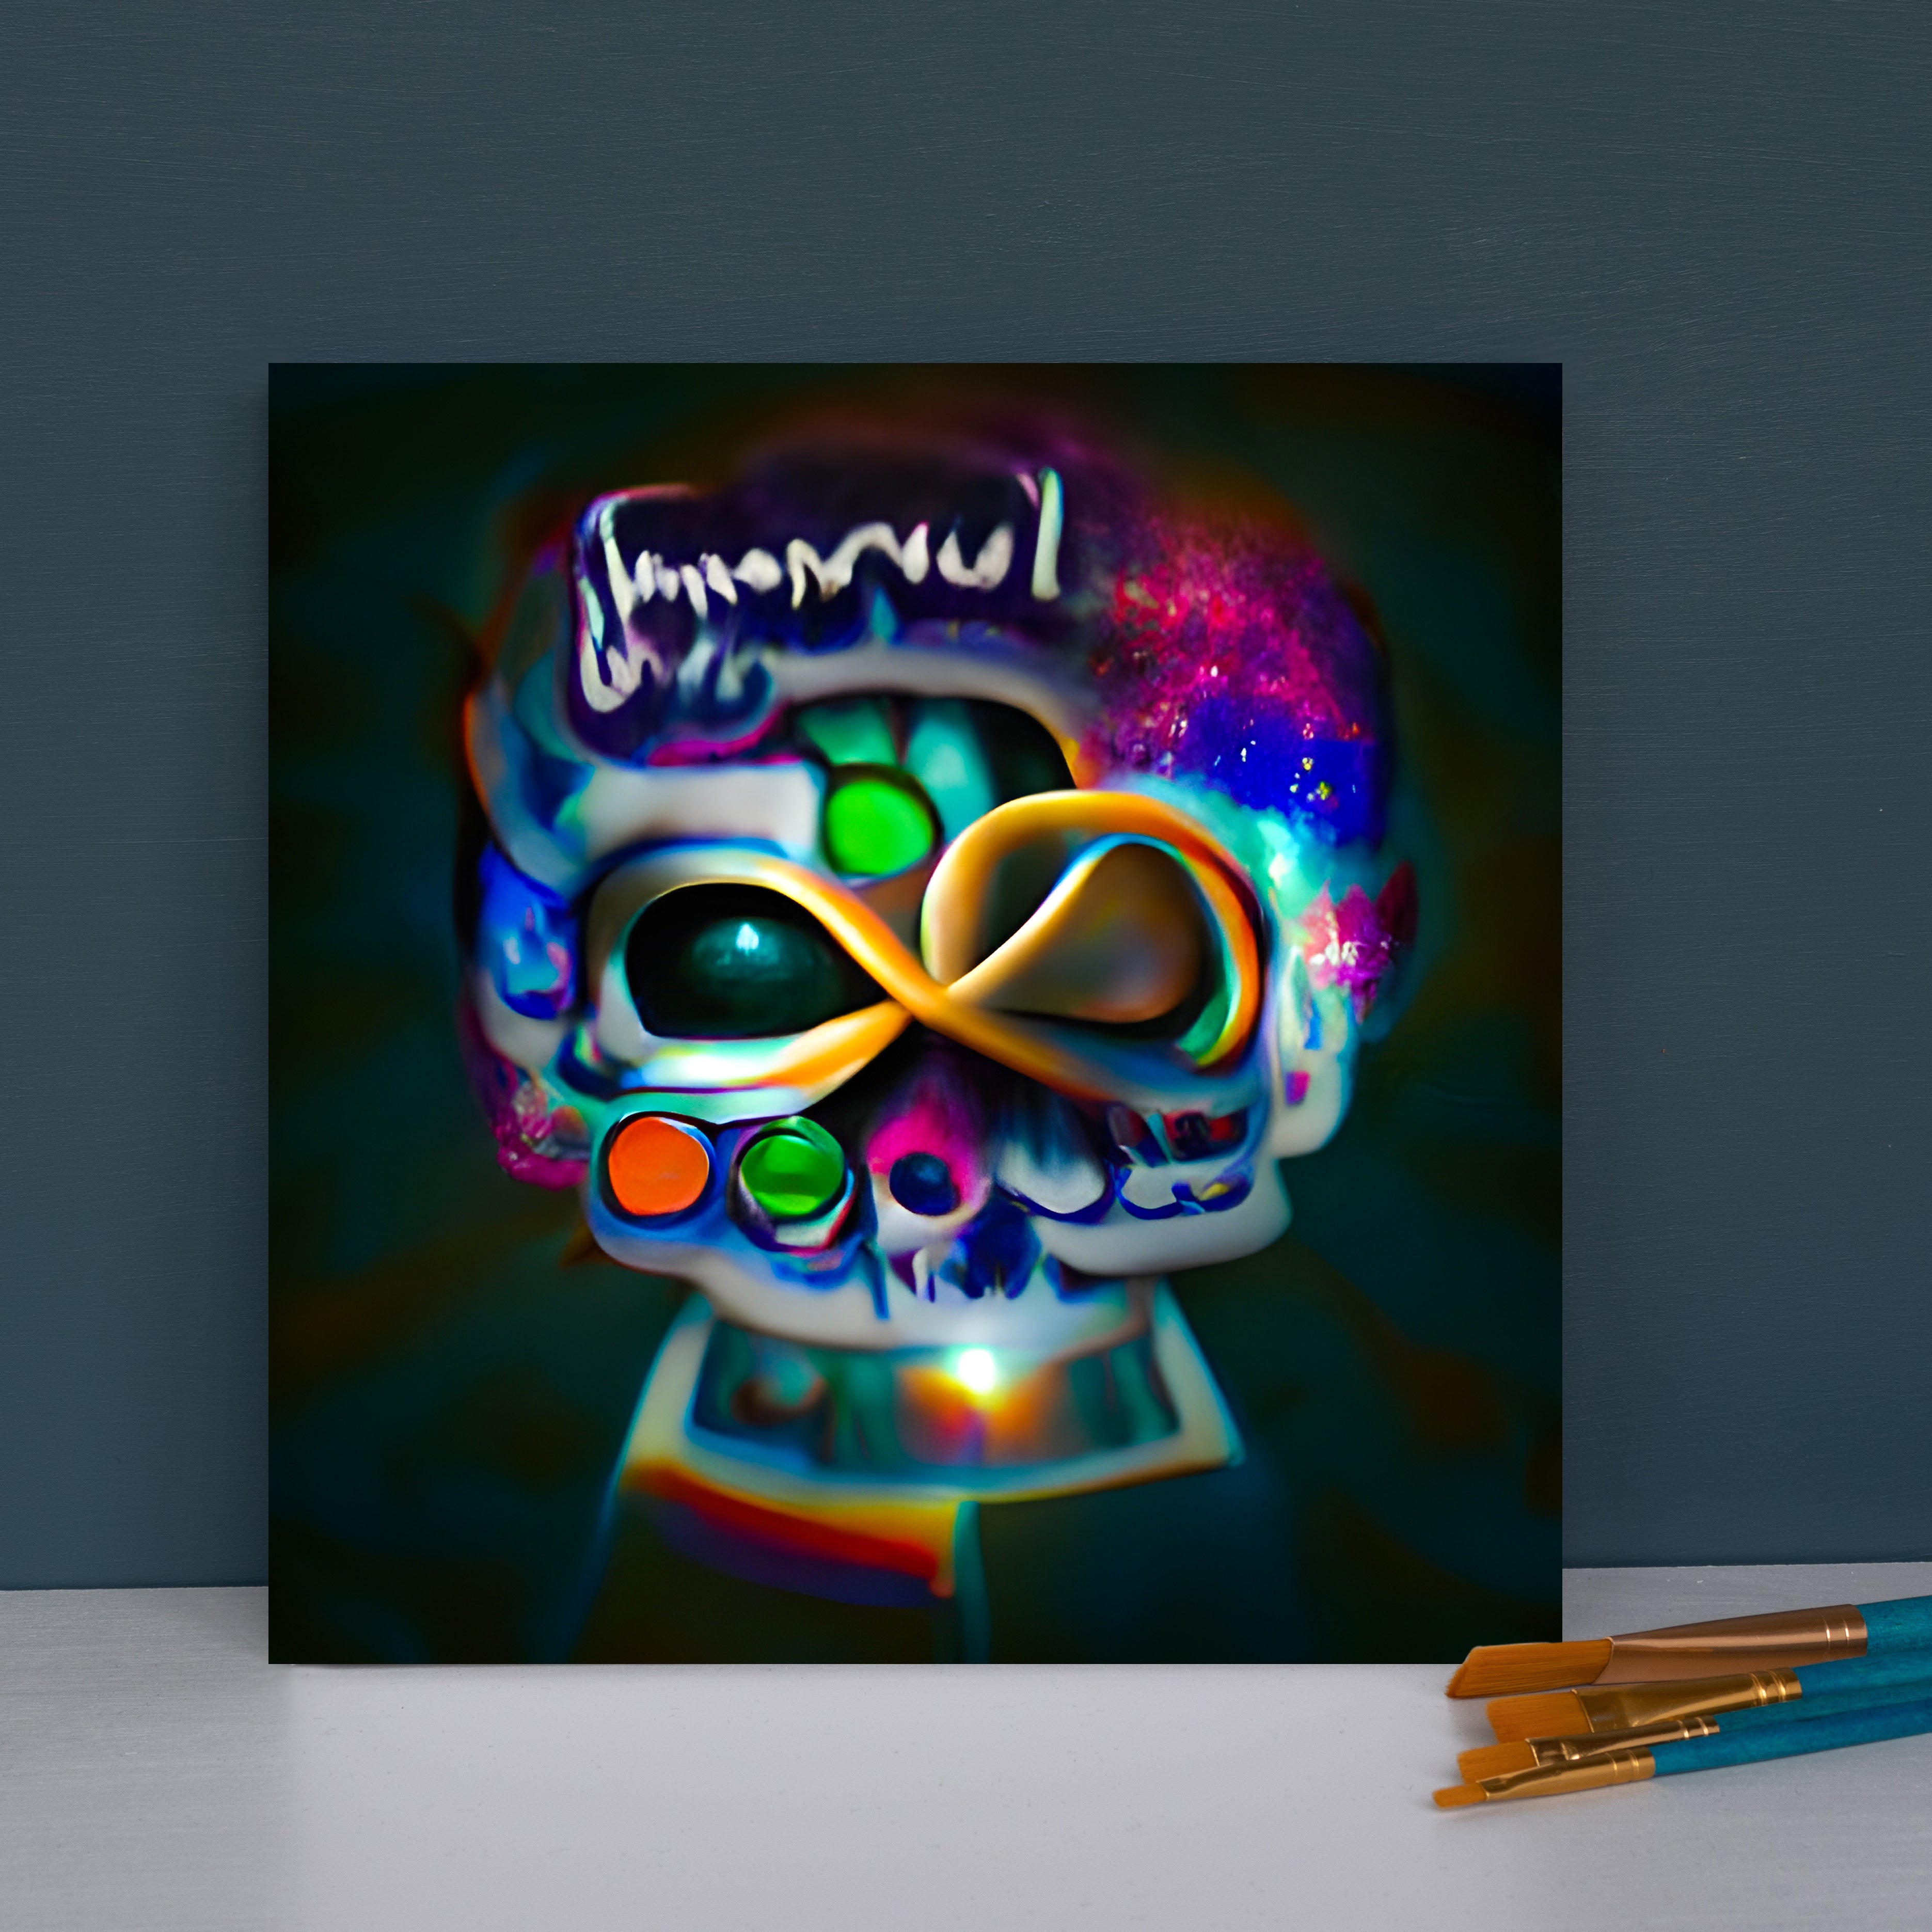 I will always remember you sugar skull infinity +Infinite Harry space radiant psychedelic character